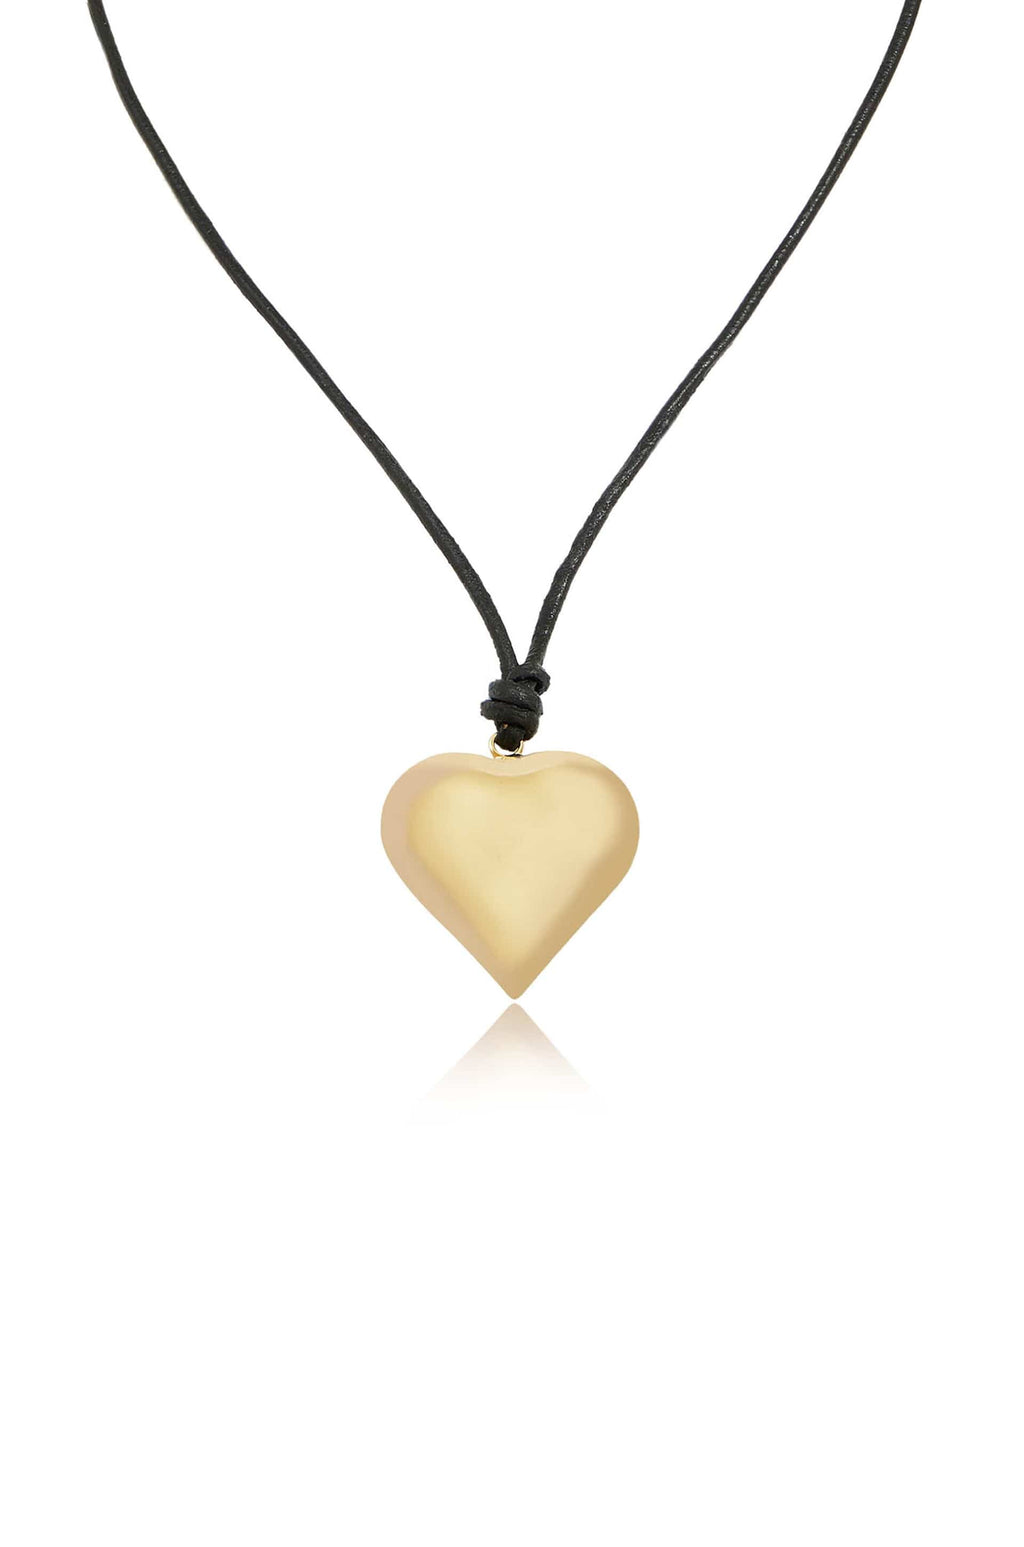 Ettika Necklaces Black Leather / One Size 18k Gold Plated Heart Pendant Adjustable Cord Necklace